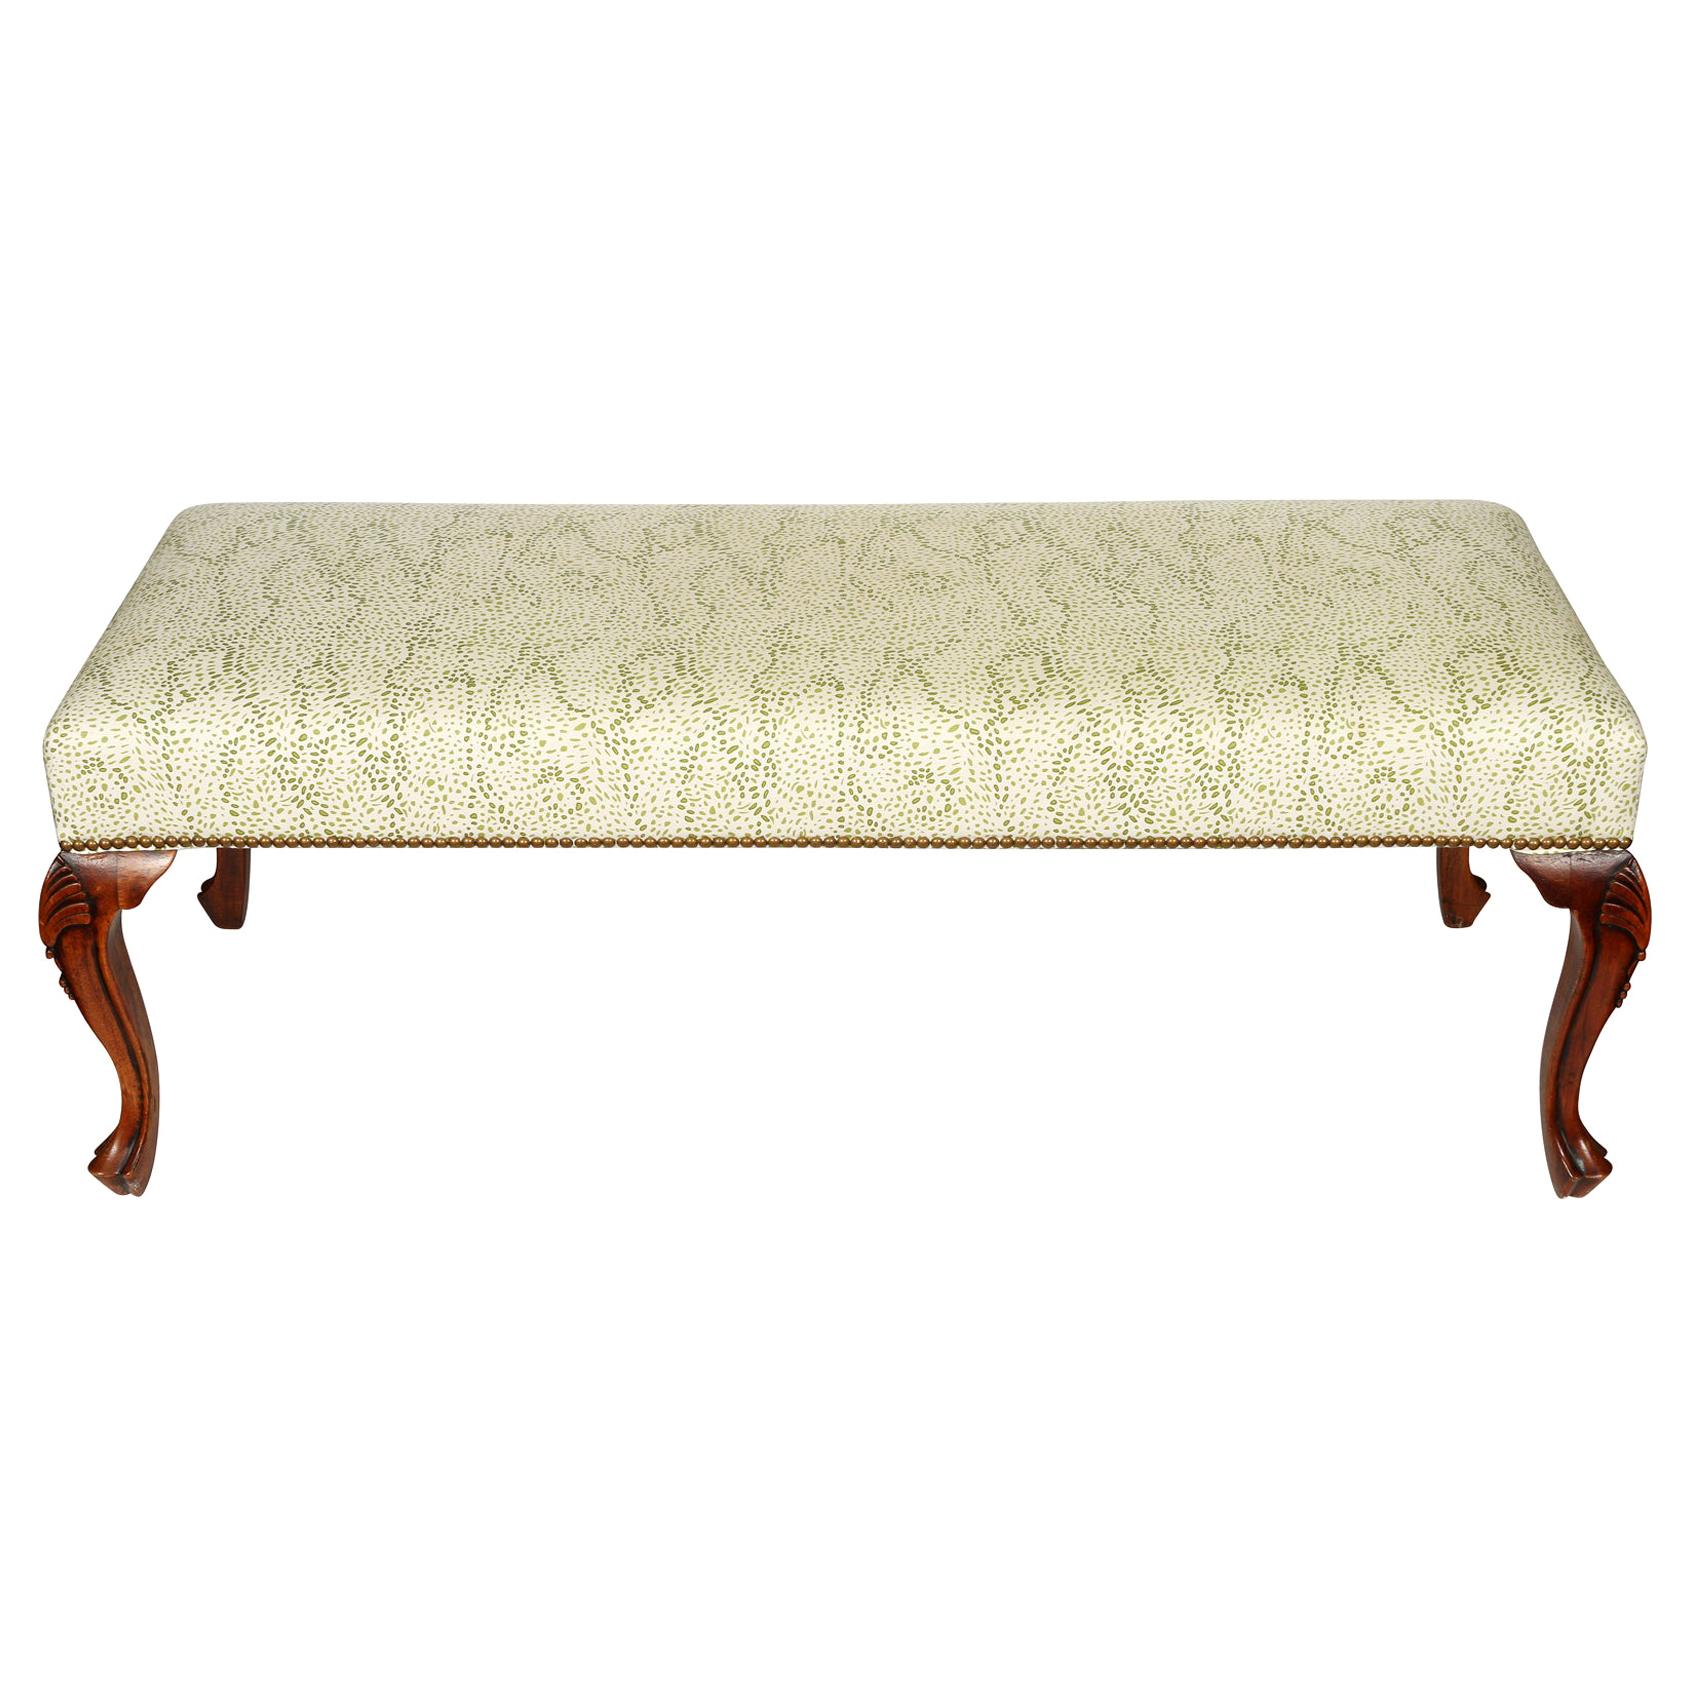 French Upholstered Bench with Cabriole Legs in Meg Braff Designs Menton Fabric